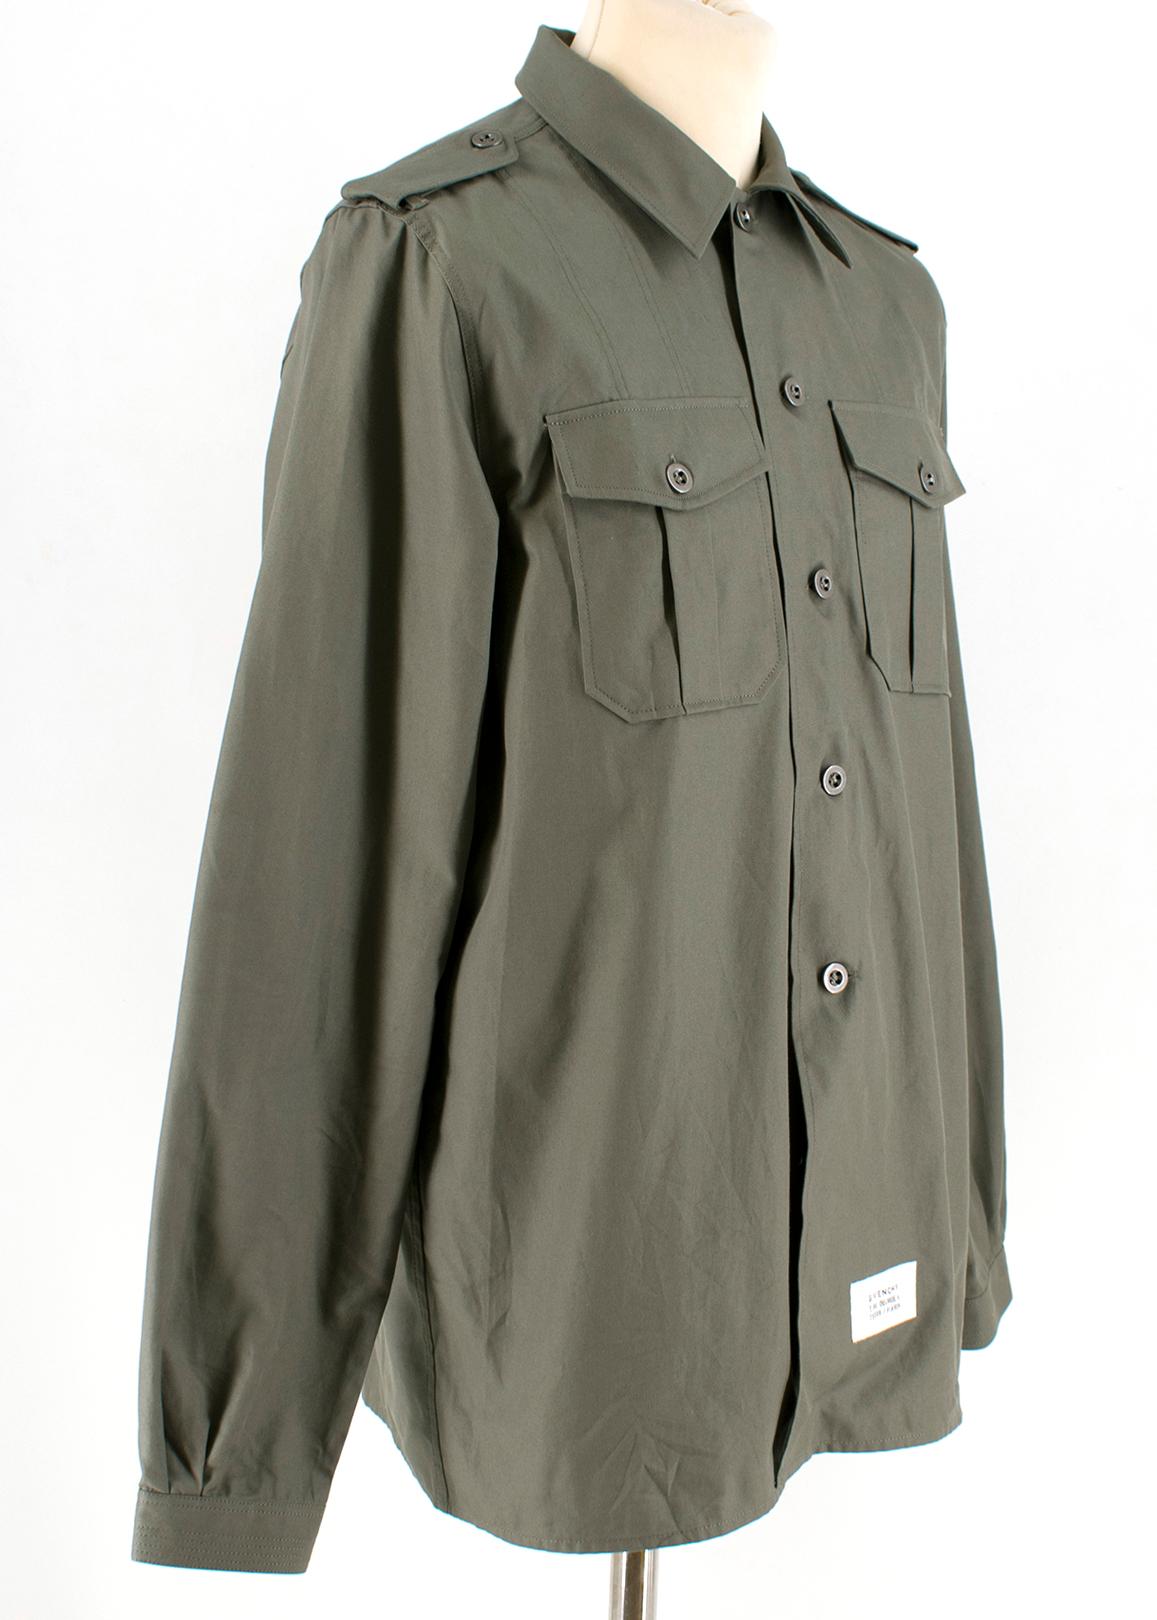 Givenchy Army Green Military Shirt

-Green, 100% cotton
-Long-sleeve
-Button-up
-Collared
-Button-up closure 
-Buttoned sleeves and shoulder detailing 

Please note, these items are pre-owned and may show some signs of storage, even when unworn and